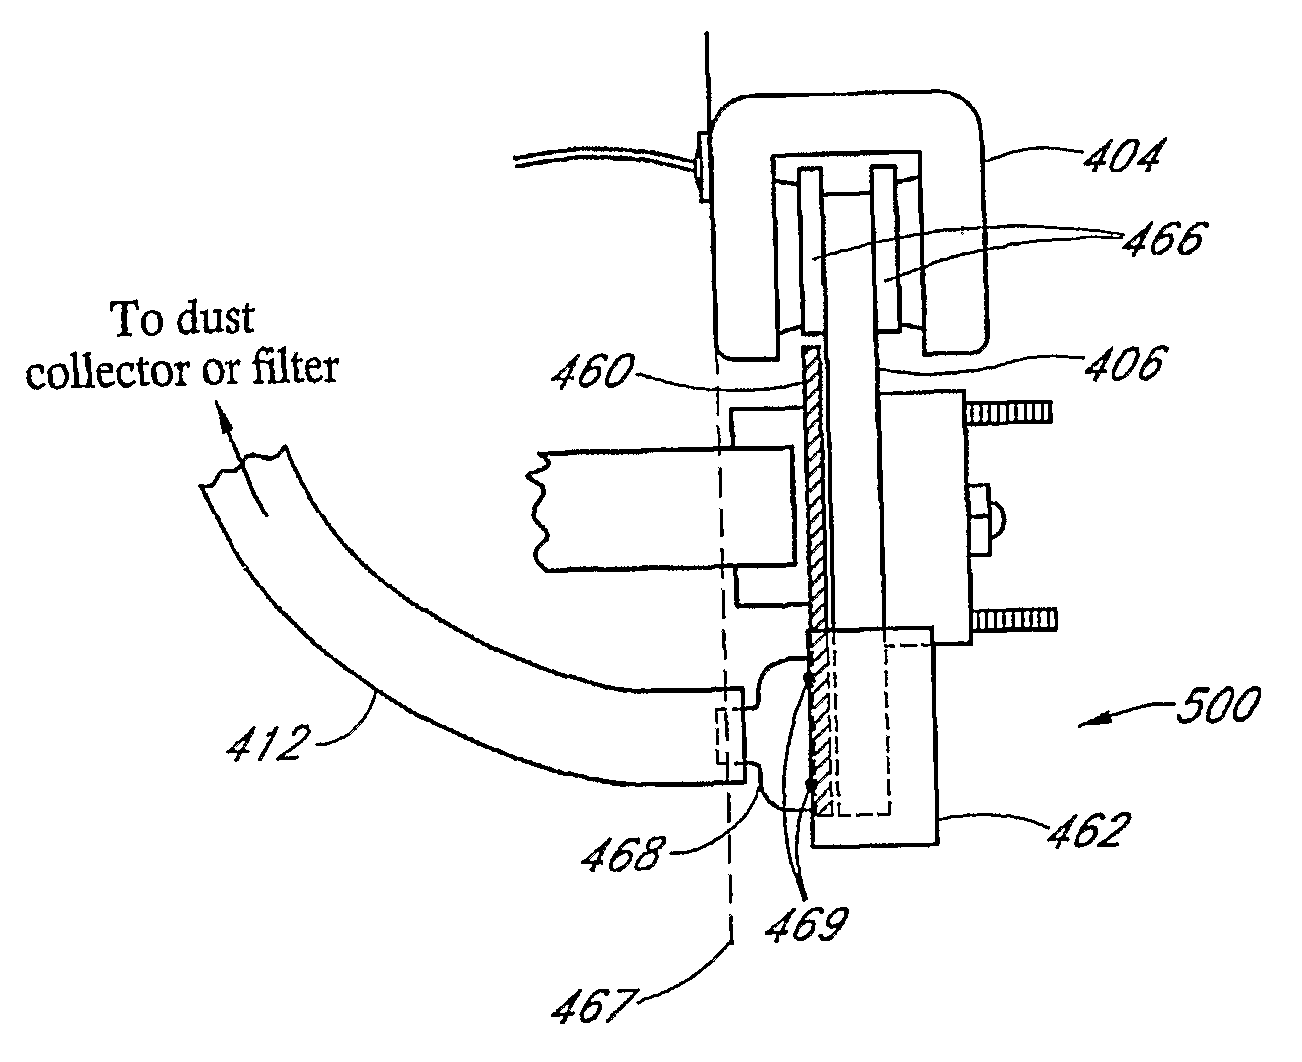 System and Method for Removing Brake Dust and Other Pollutants